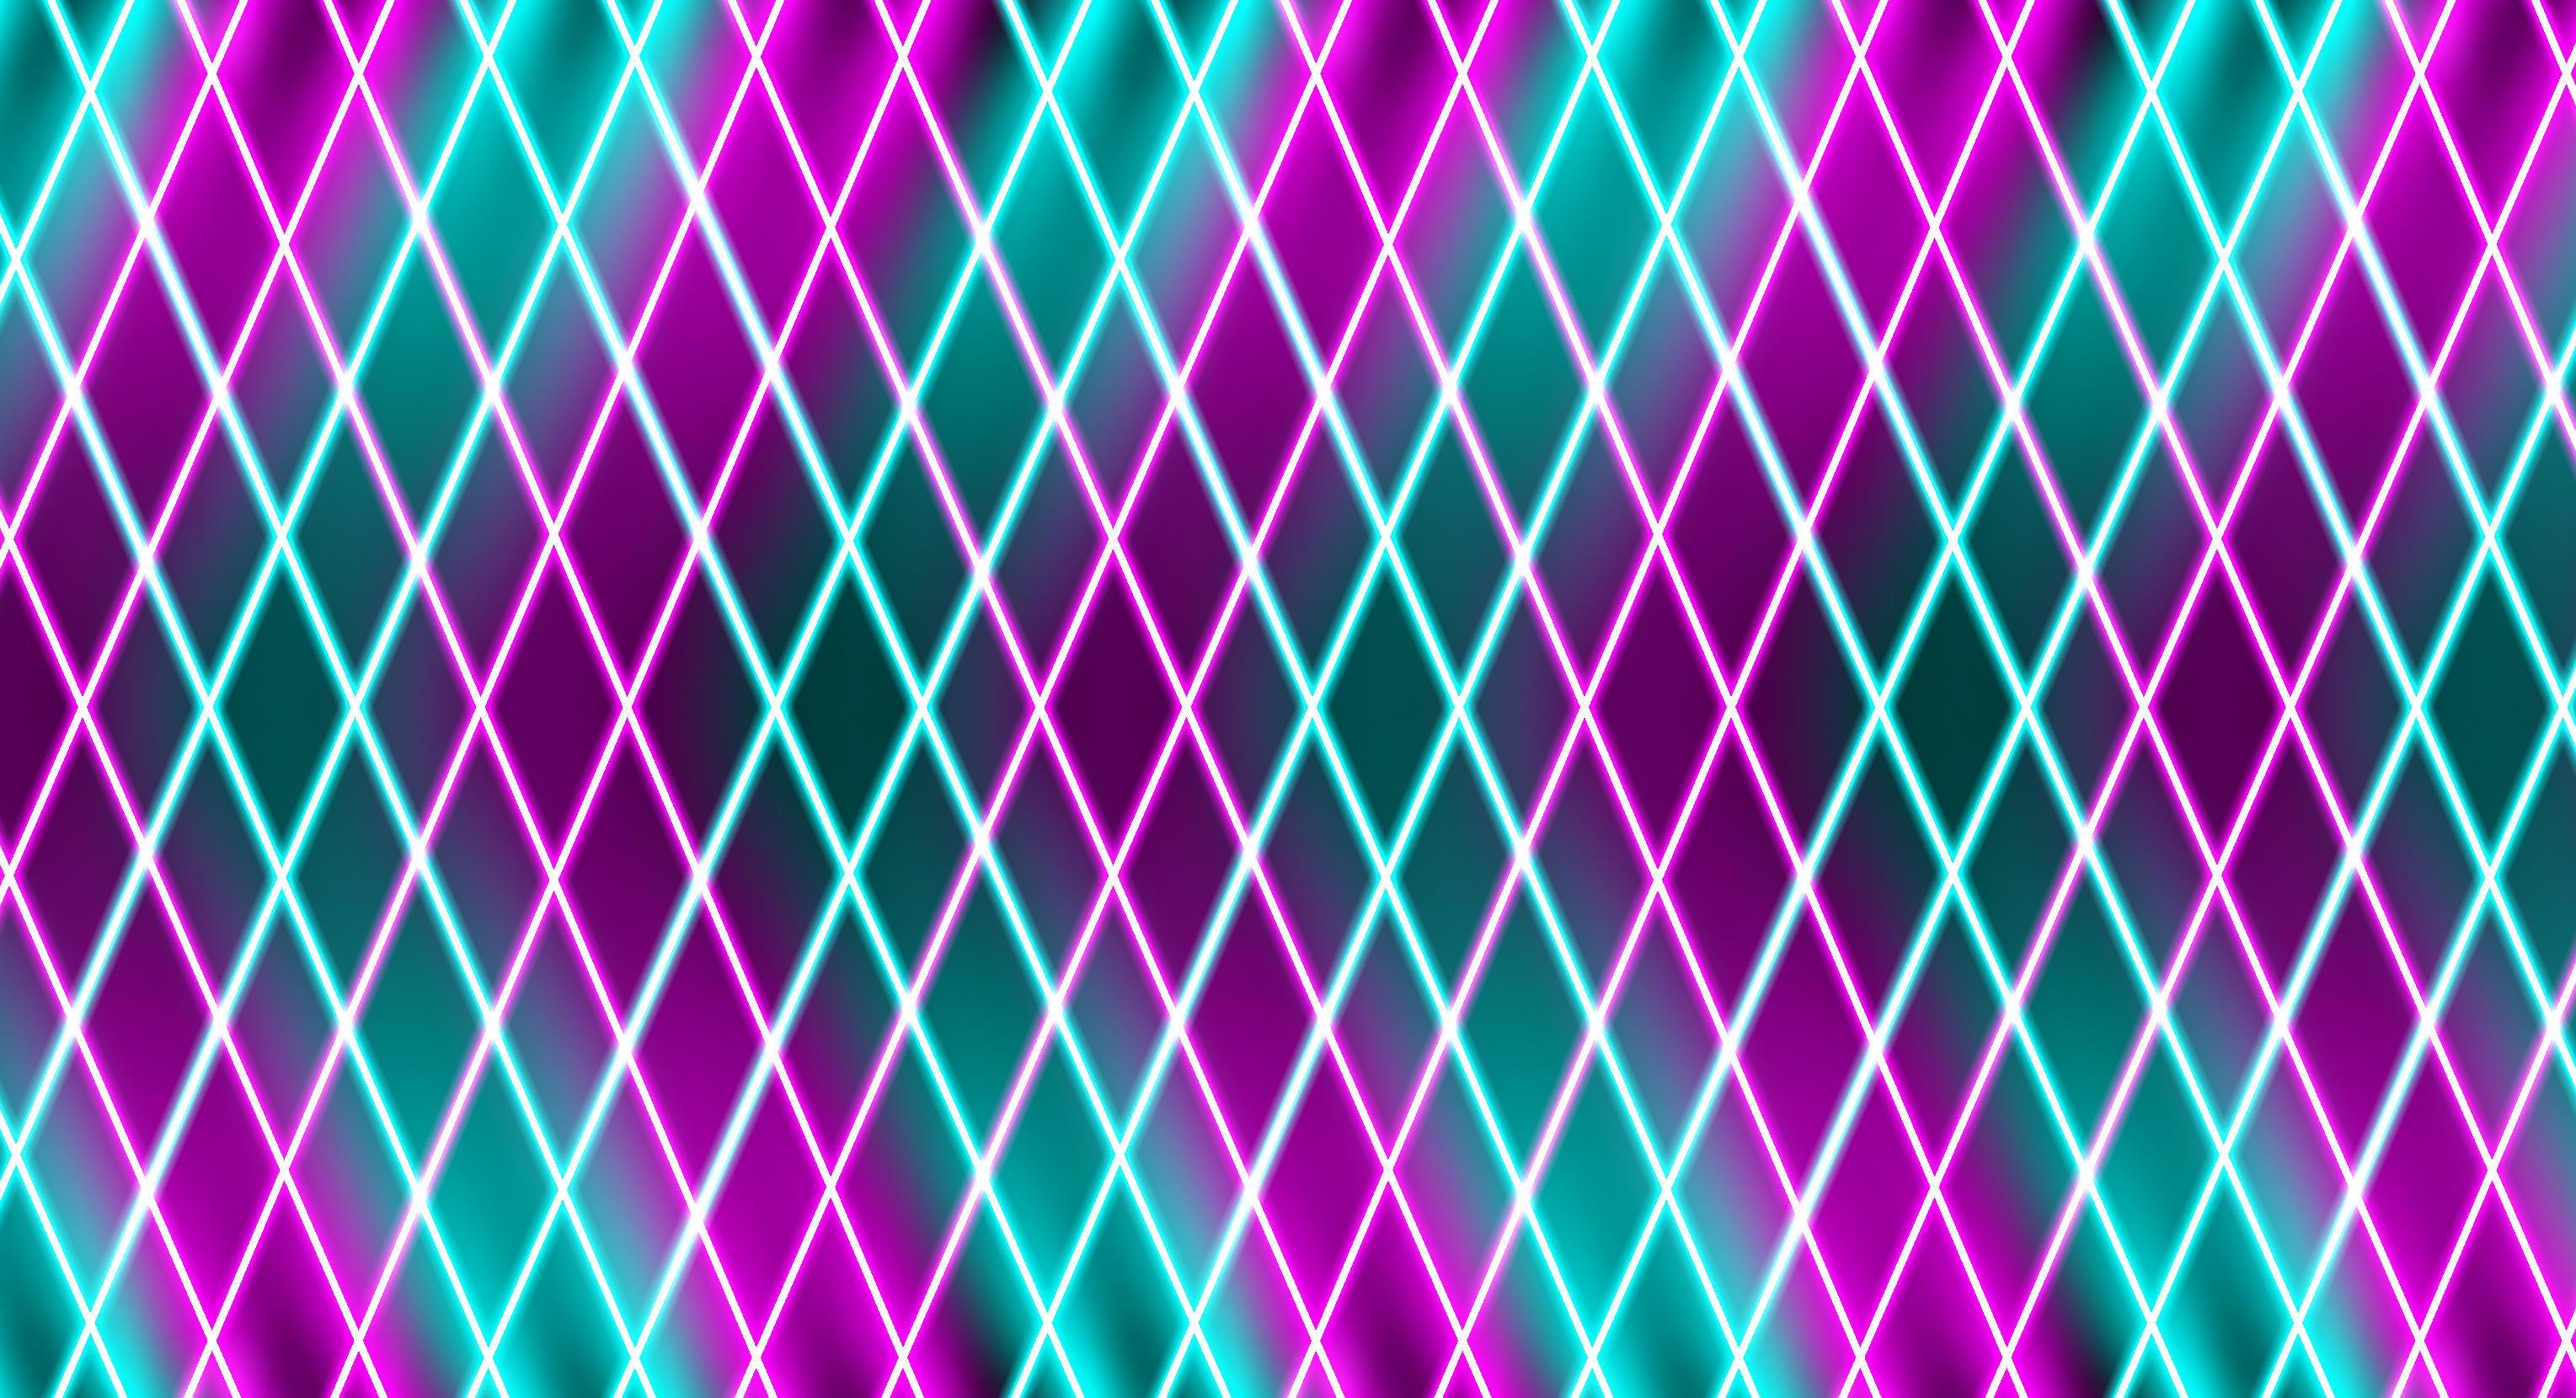 Abstract Neon Effect Glowing Vibrant Colors. Stock Photo, Picture